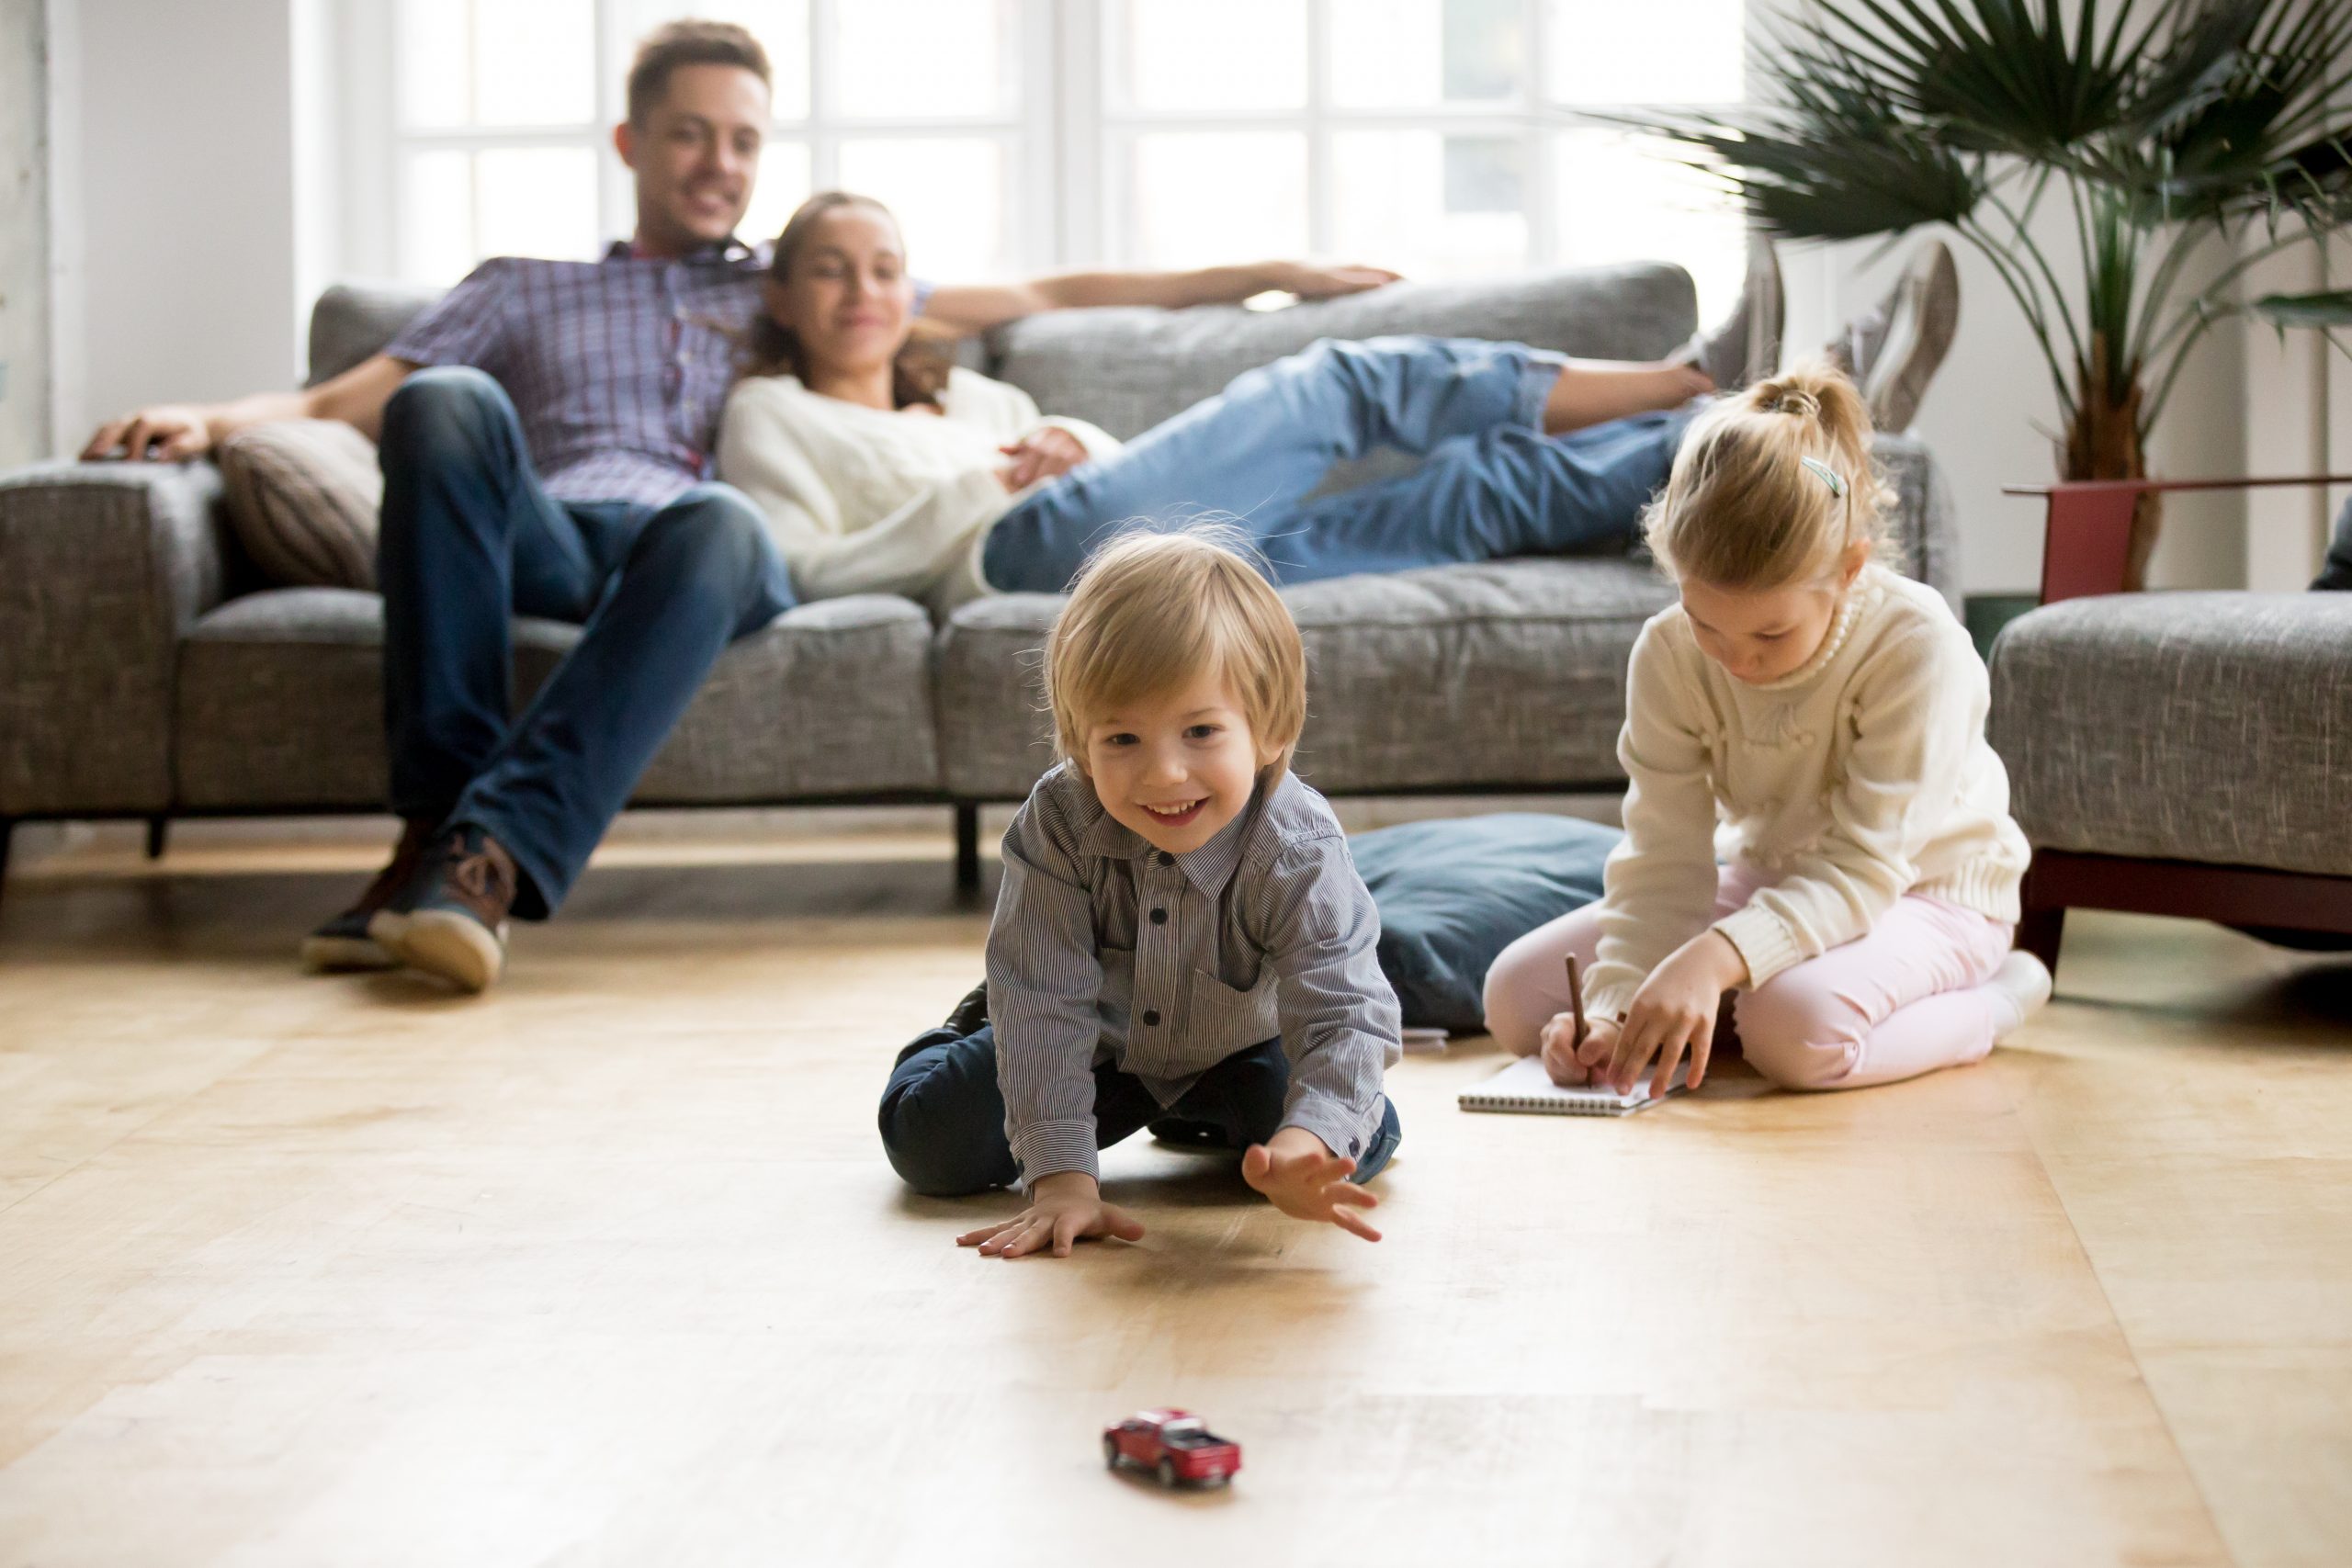 Best Of 51+ Alluring kids playing in living room For Every Budget